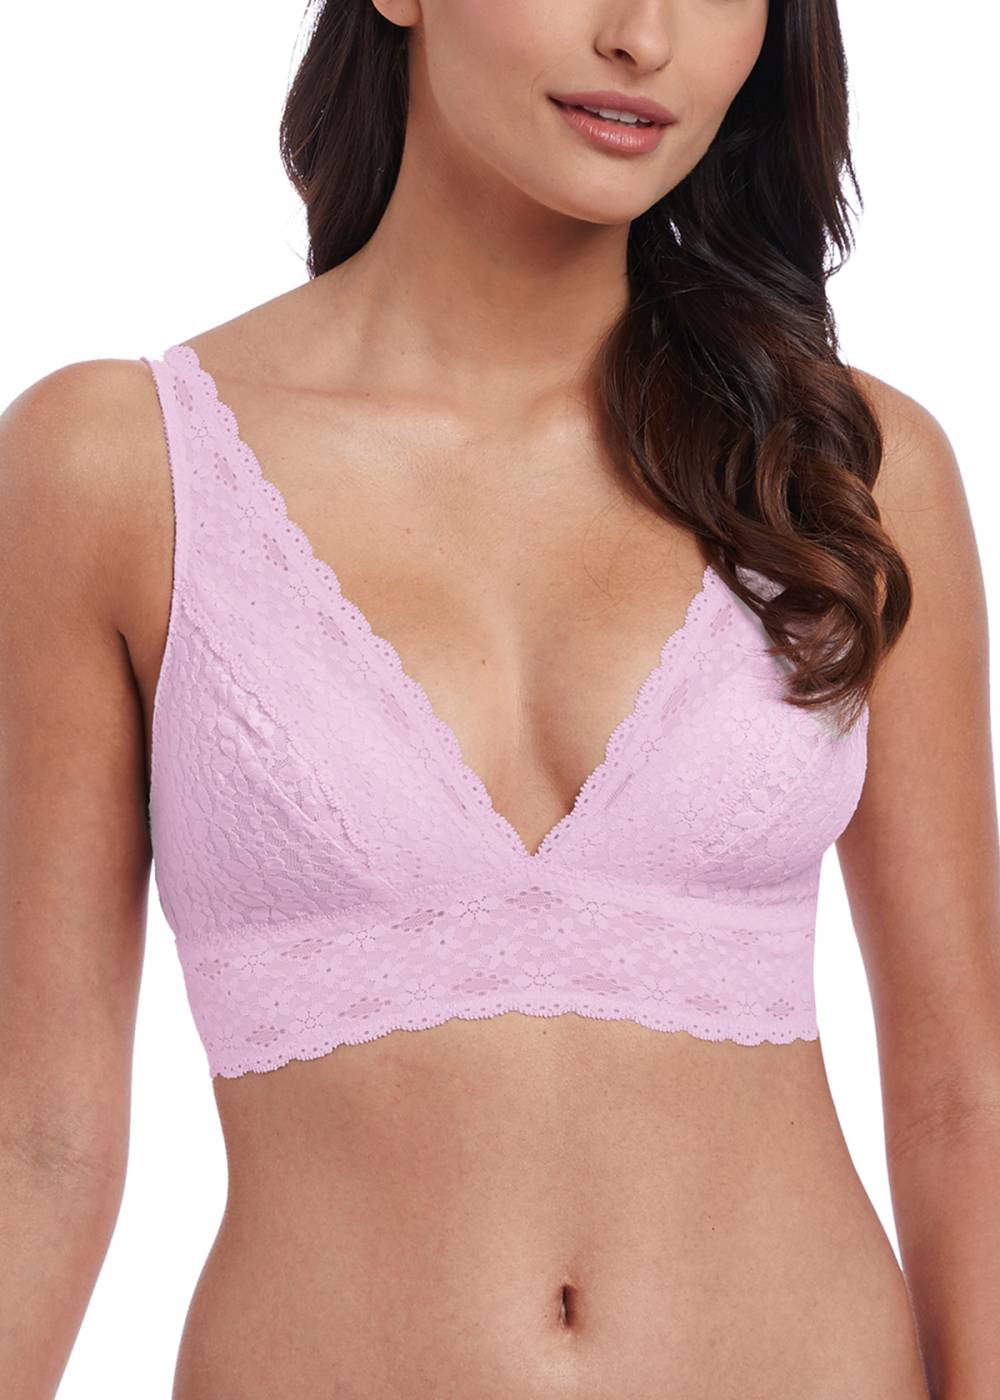 WA811205-534-primary-Wacoal-Halo-Lace-Sweet-Pink-Wire-Free-Soft-Cup-Bra